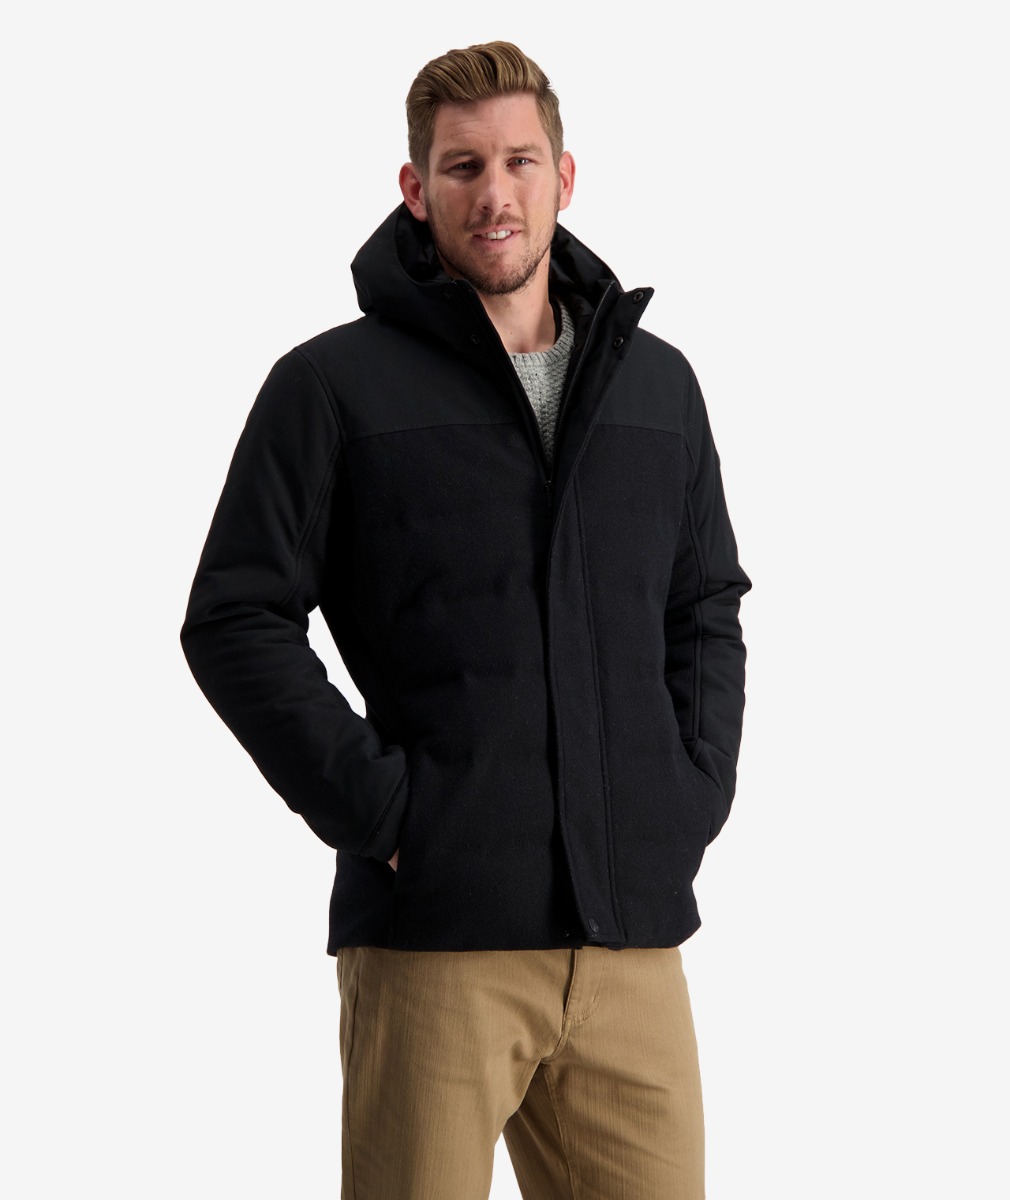 The Swanndri Men's Karamea Insulated Jacket in Black is guaranteed to keep you warm, with Primaloft Thermaplume through the body.